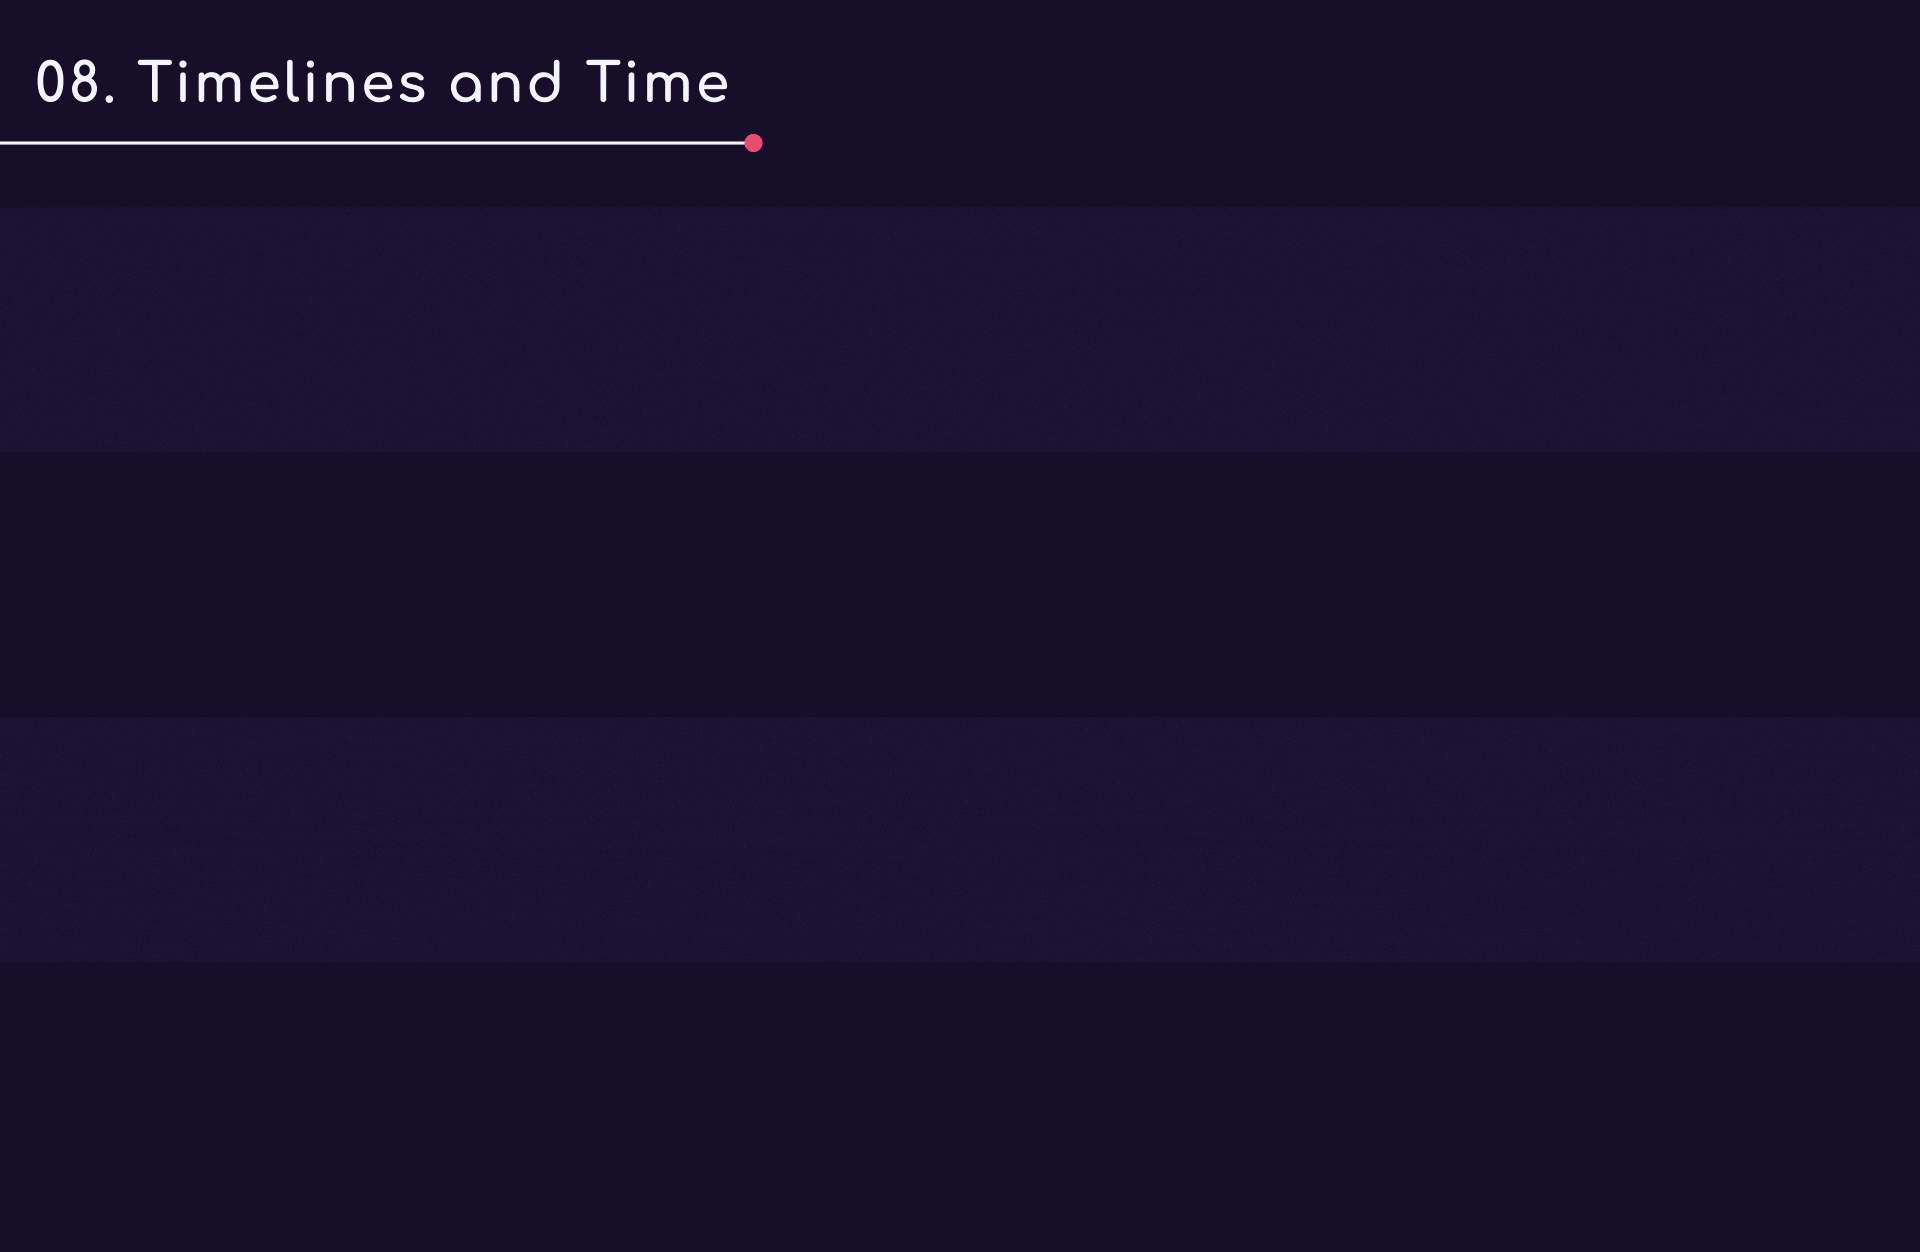 08. Time And Timelines